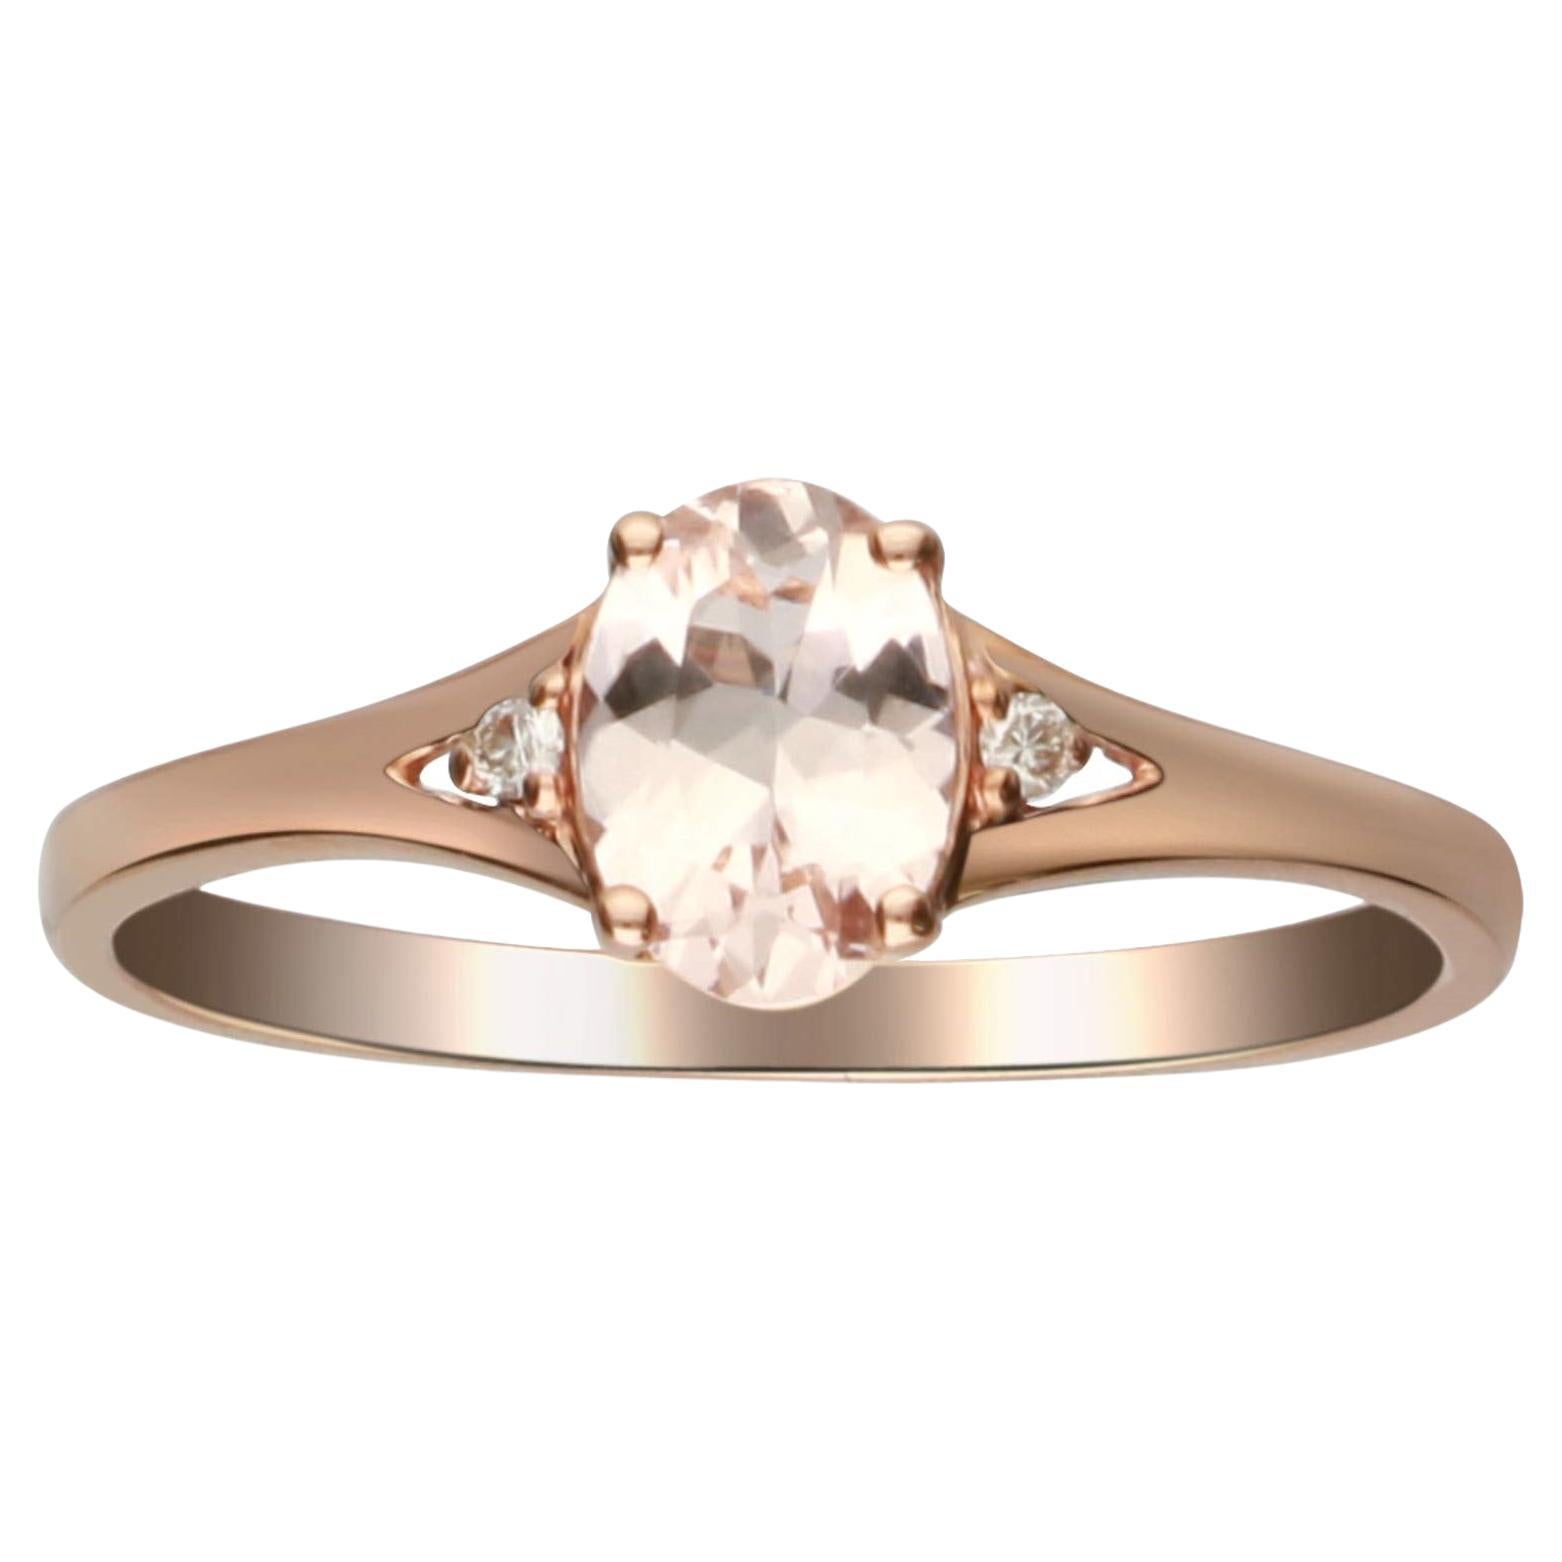 0.75 Carat Oval Cut Morganite with Diamond Accents 10K Rose Gold Ring